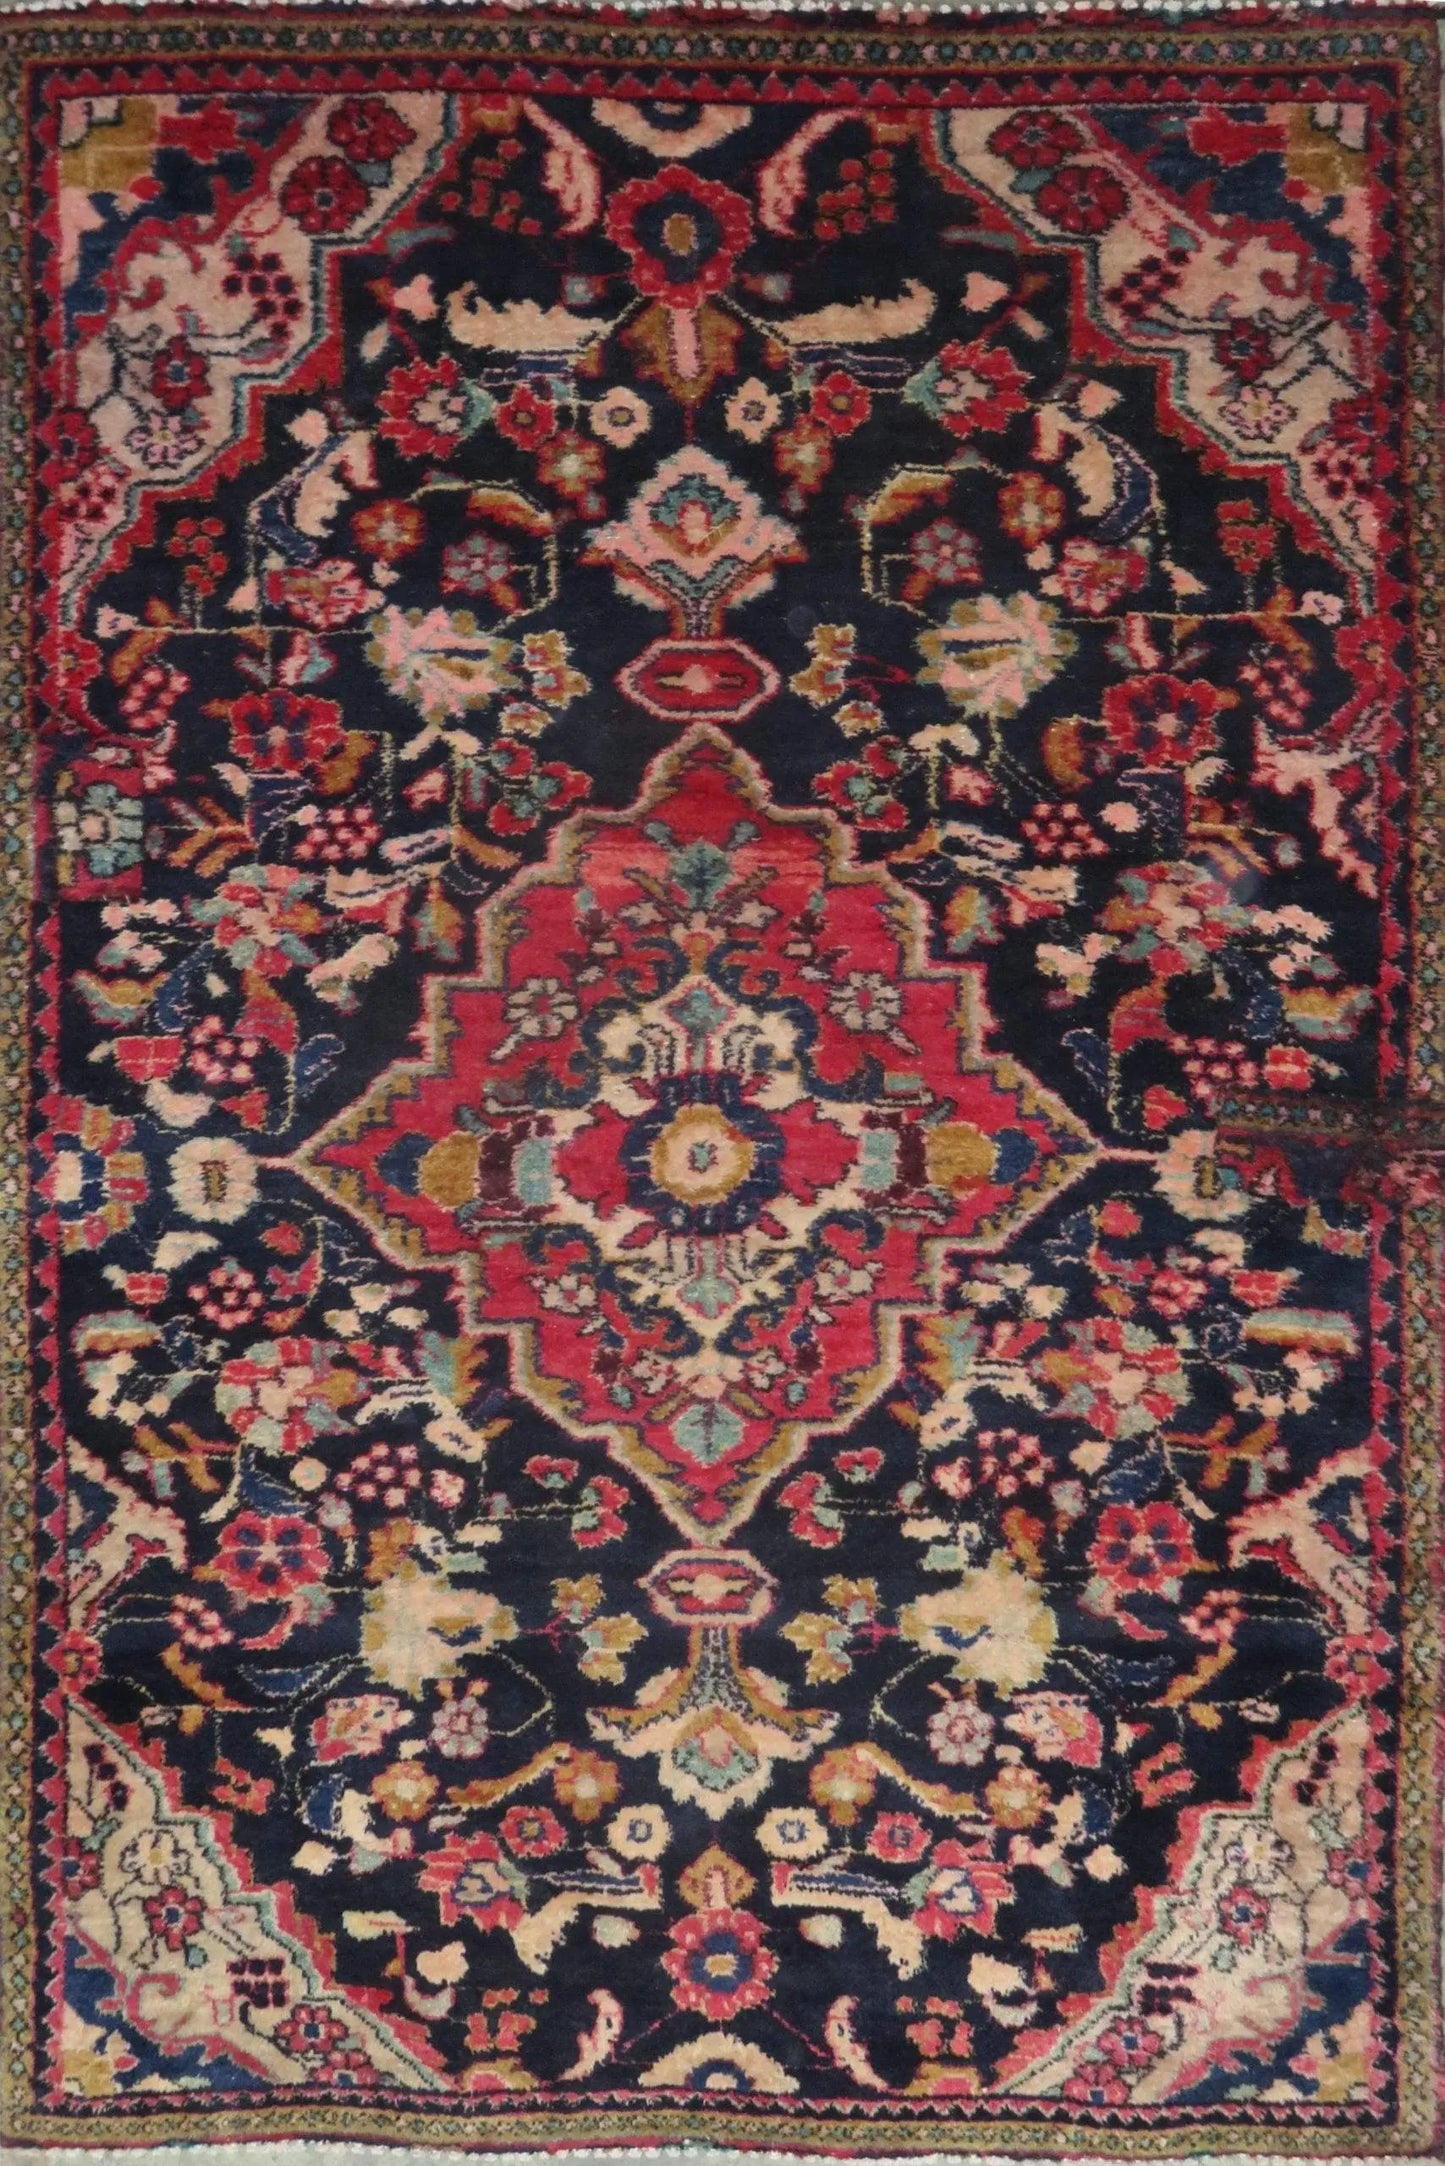 Hand-Knotted Vintage Rug 5'10" x 4'1"